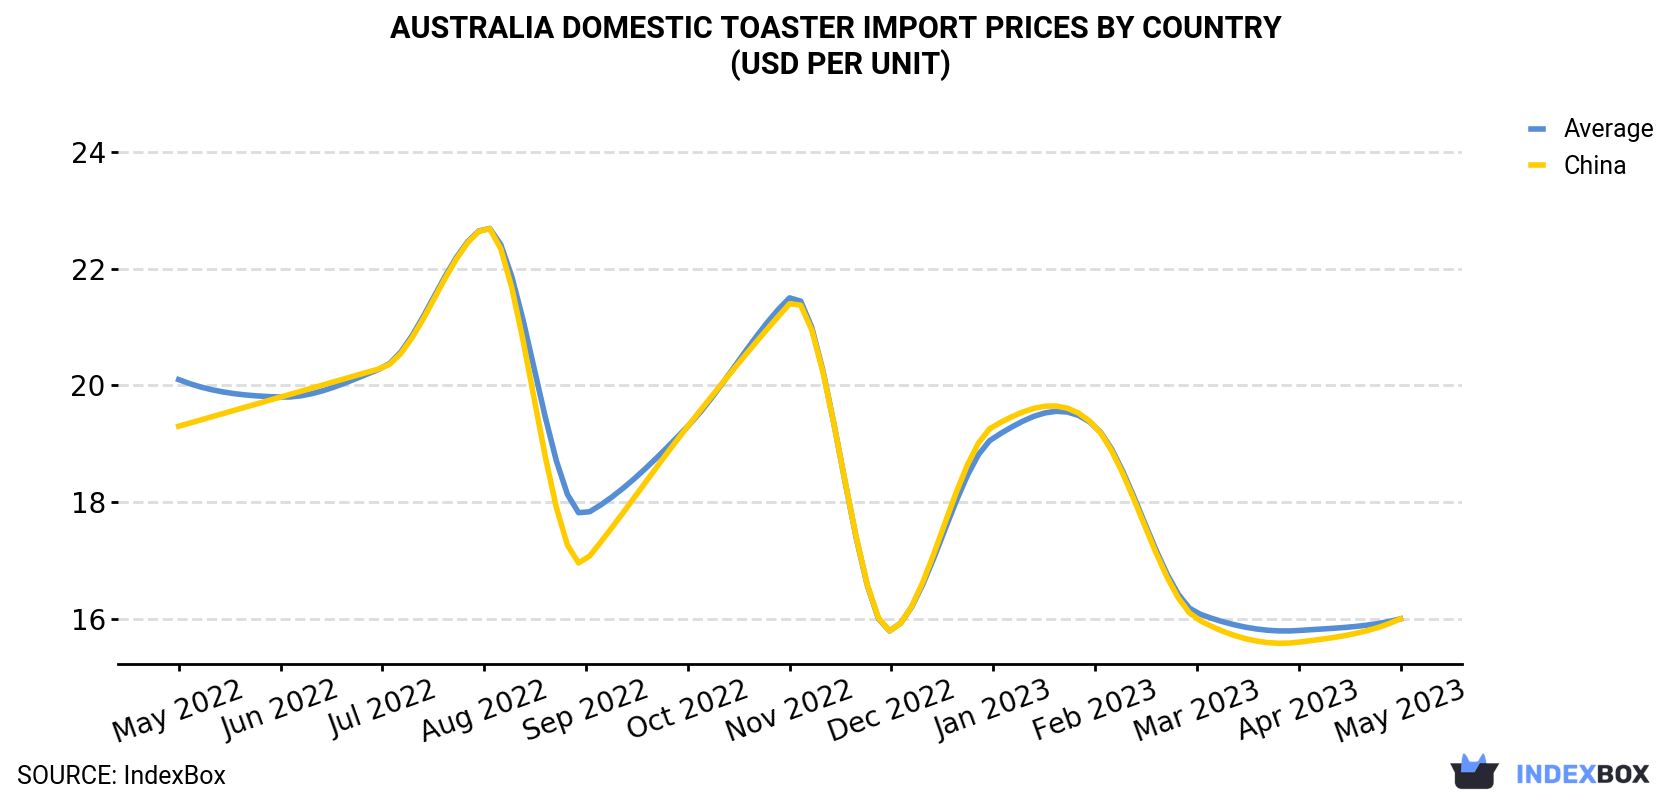 Australia Domestic Toaster Import Prices By Country (USD Per Unit)